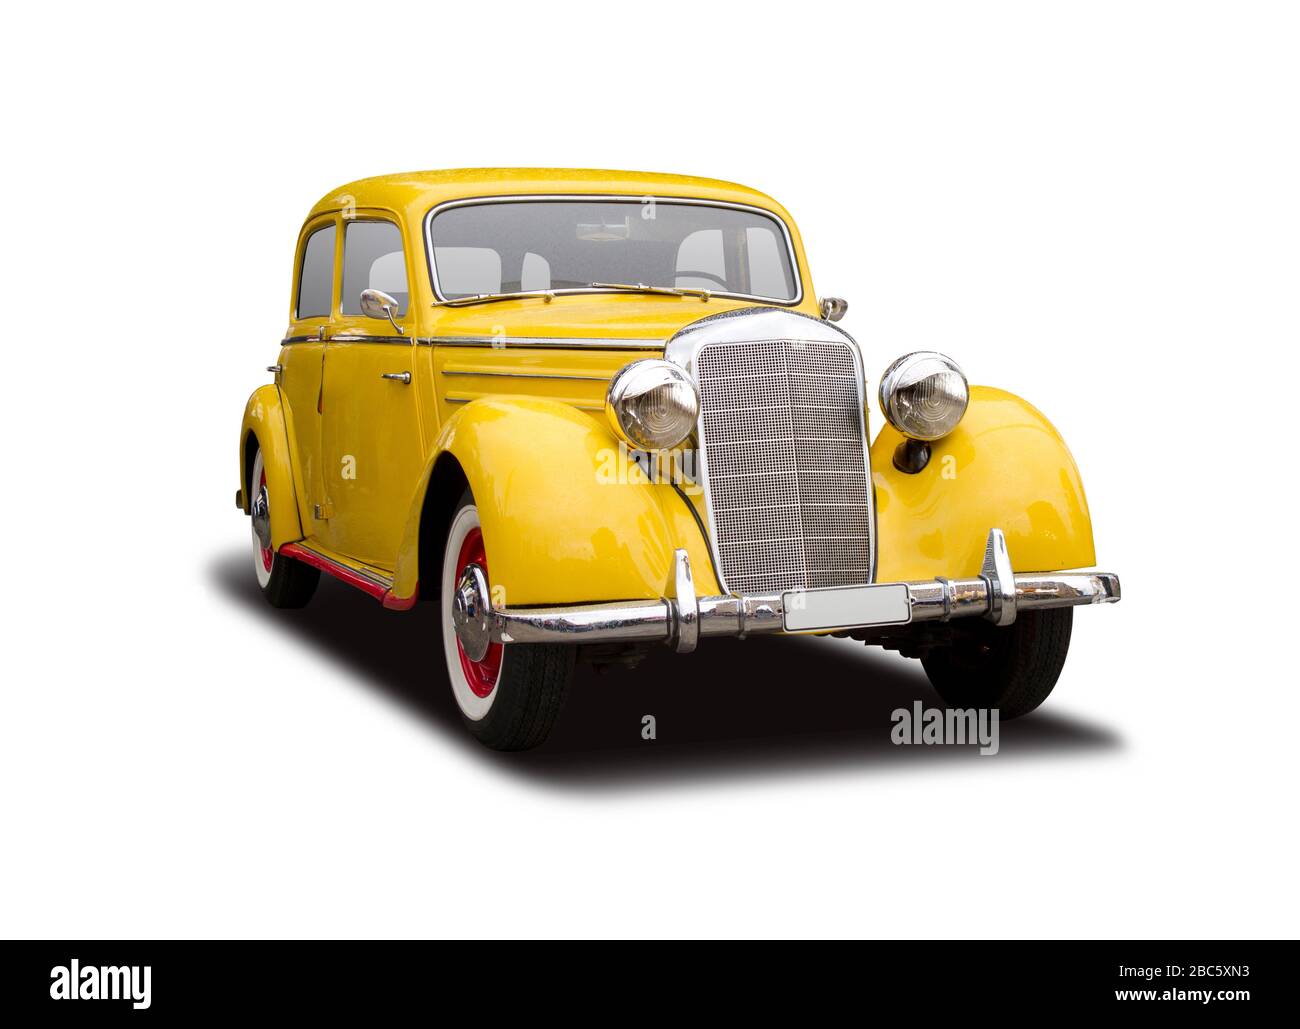 Yellow antique German car side view isolated on white Stock Photo